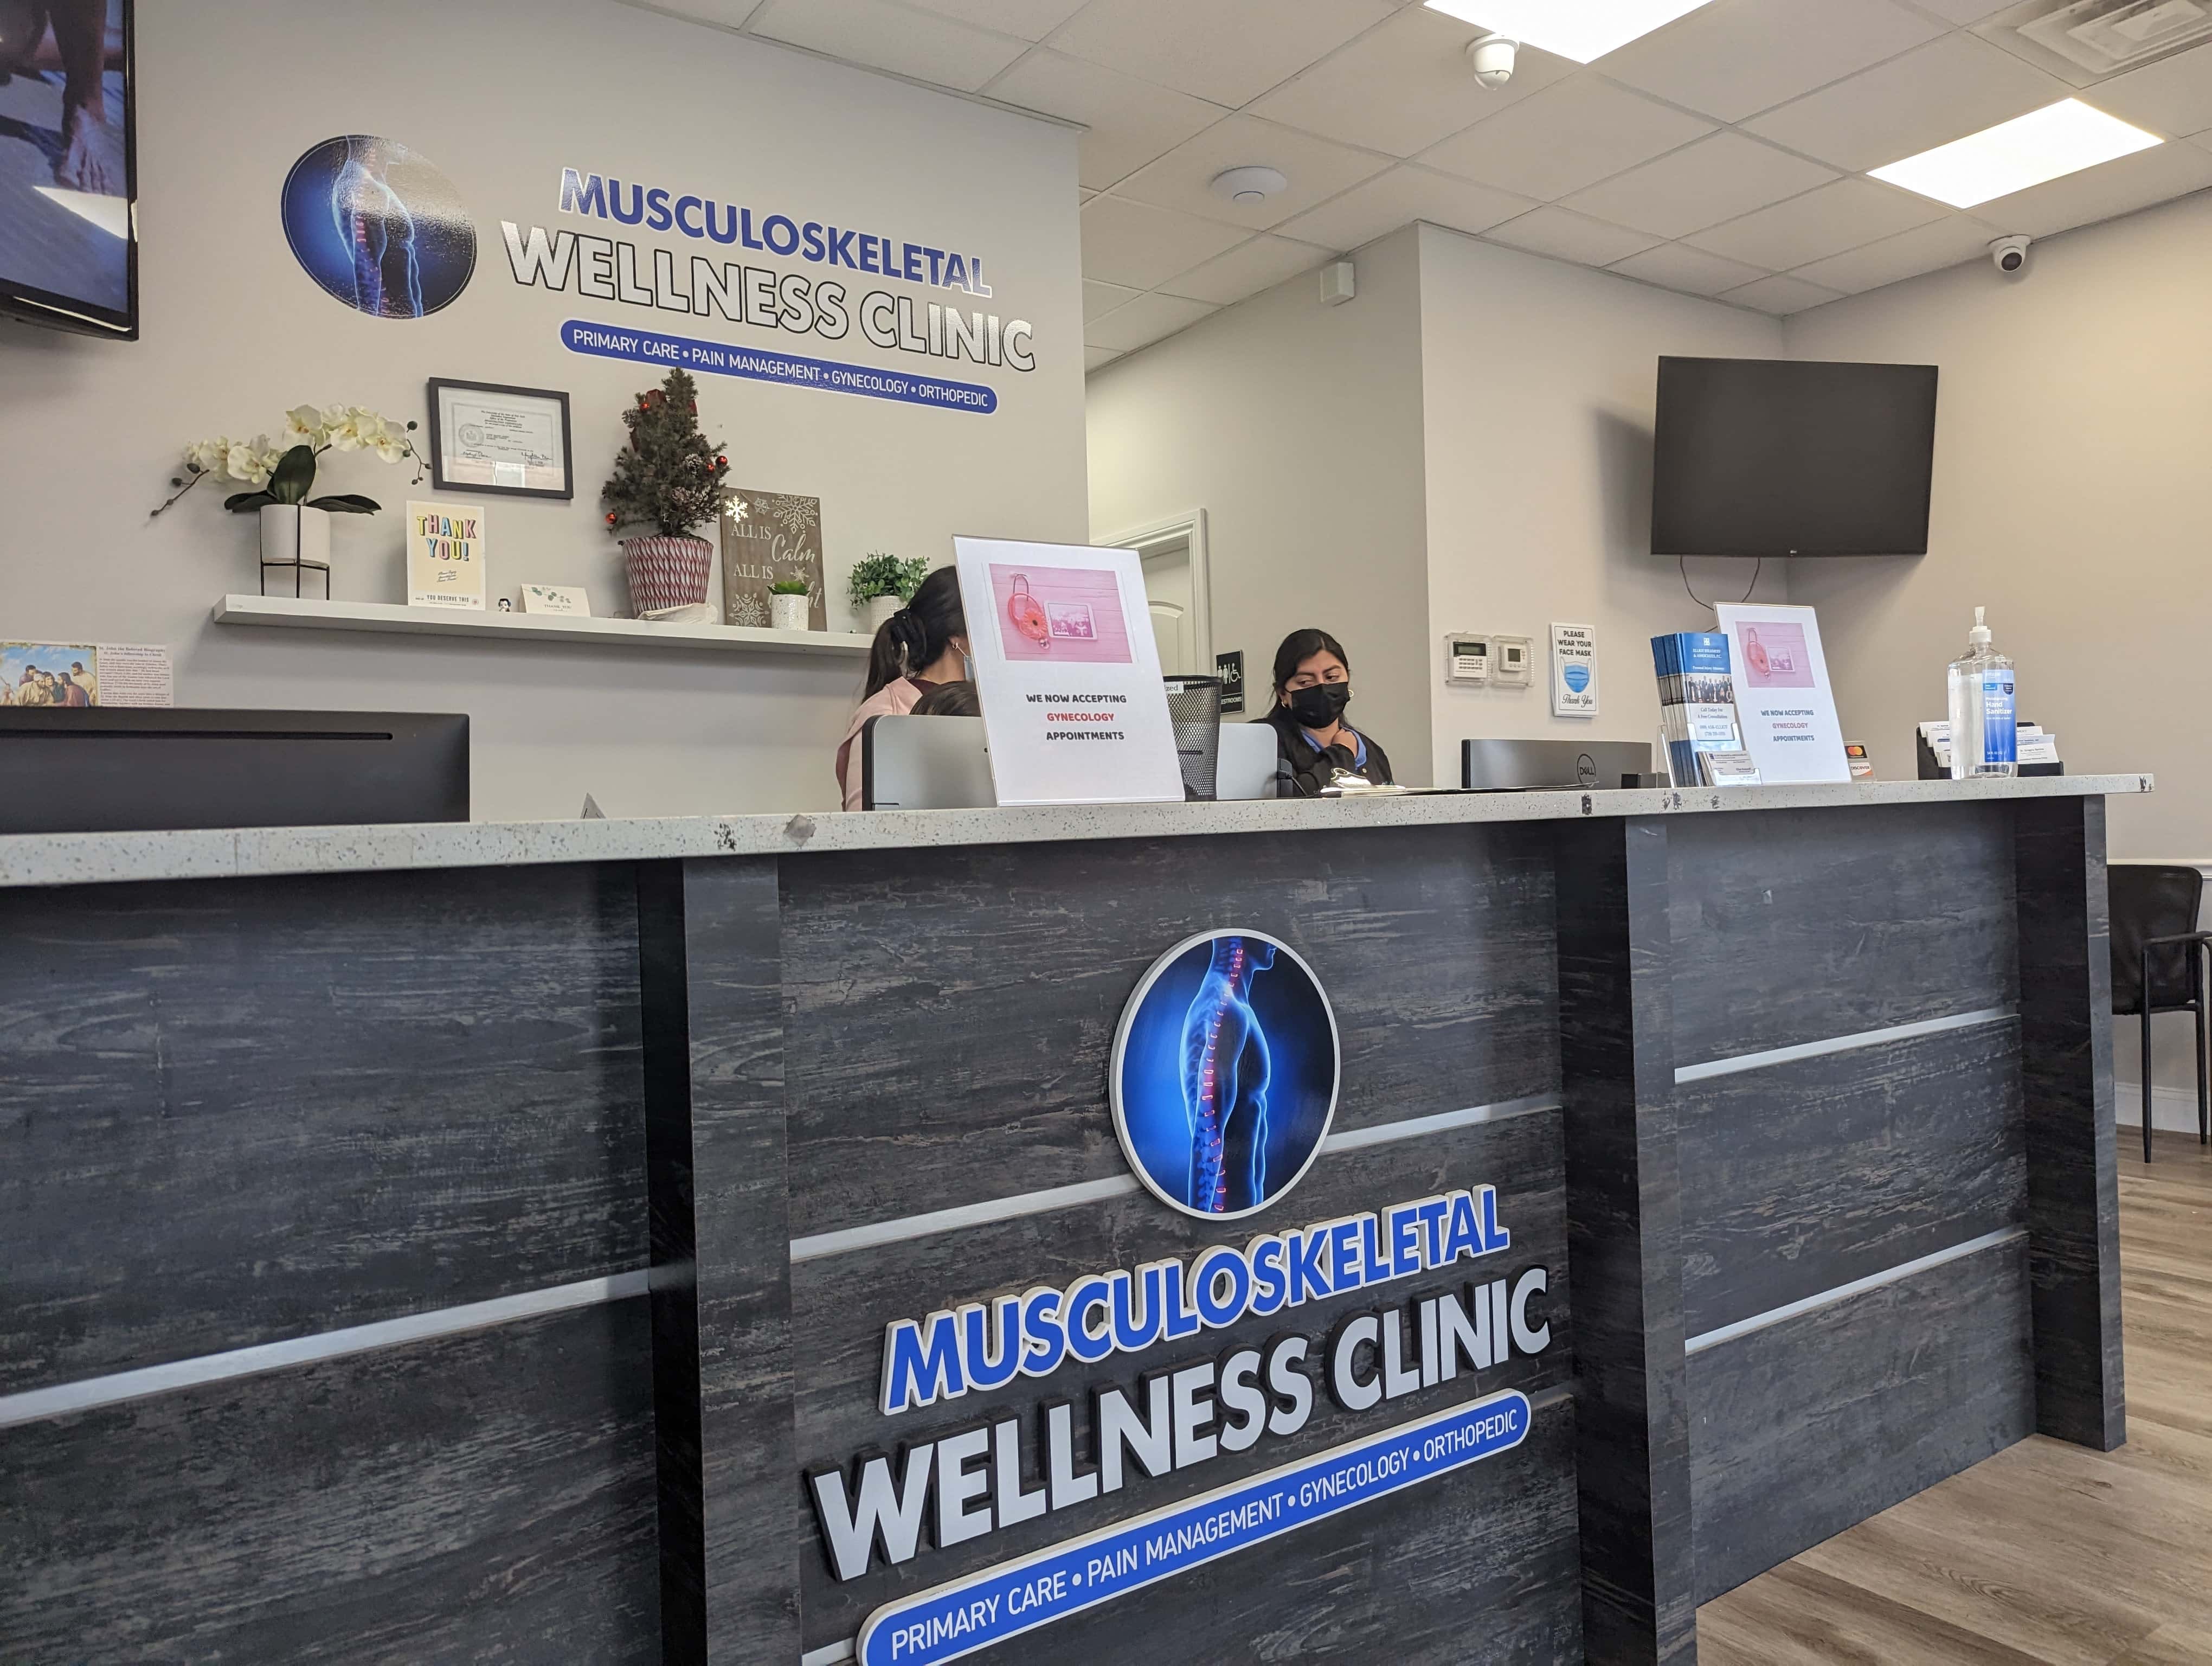 Musculoskeletal Wellness Clinic - Forest Hills, NY, US, primary care